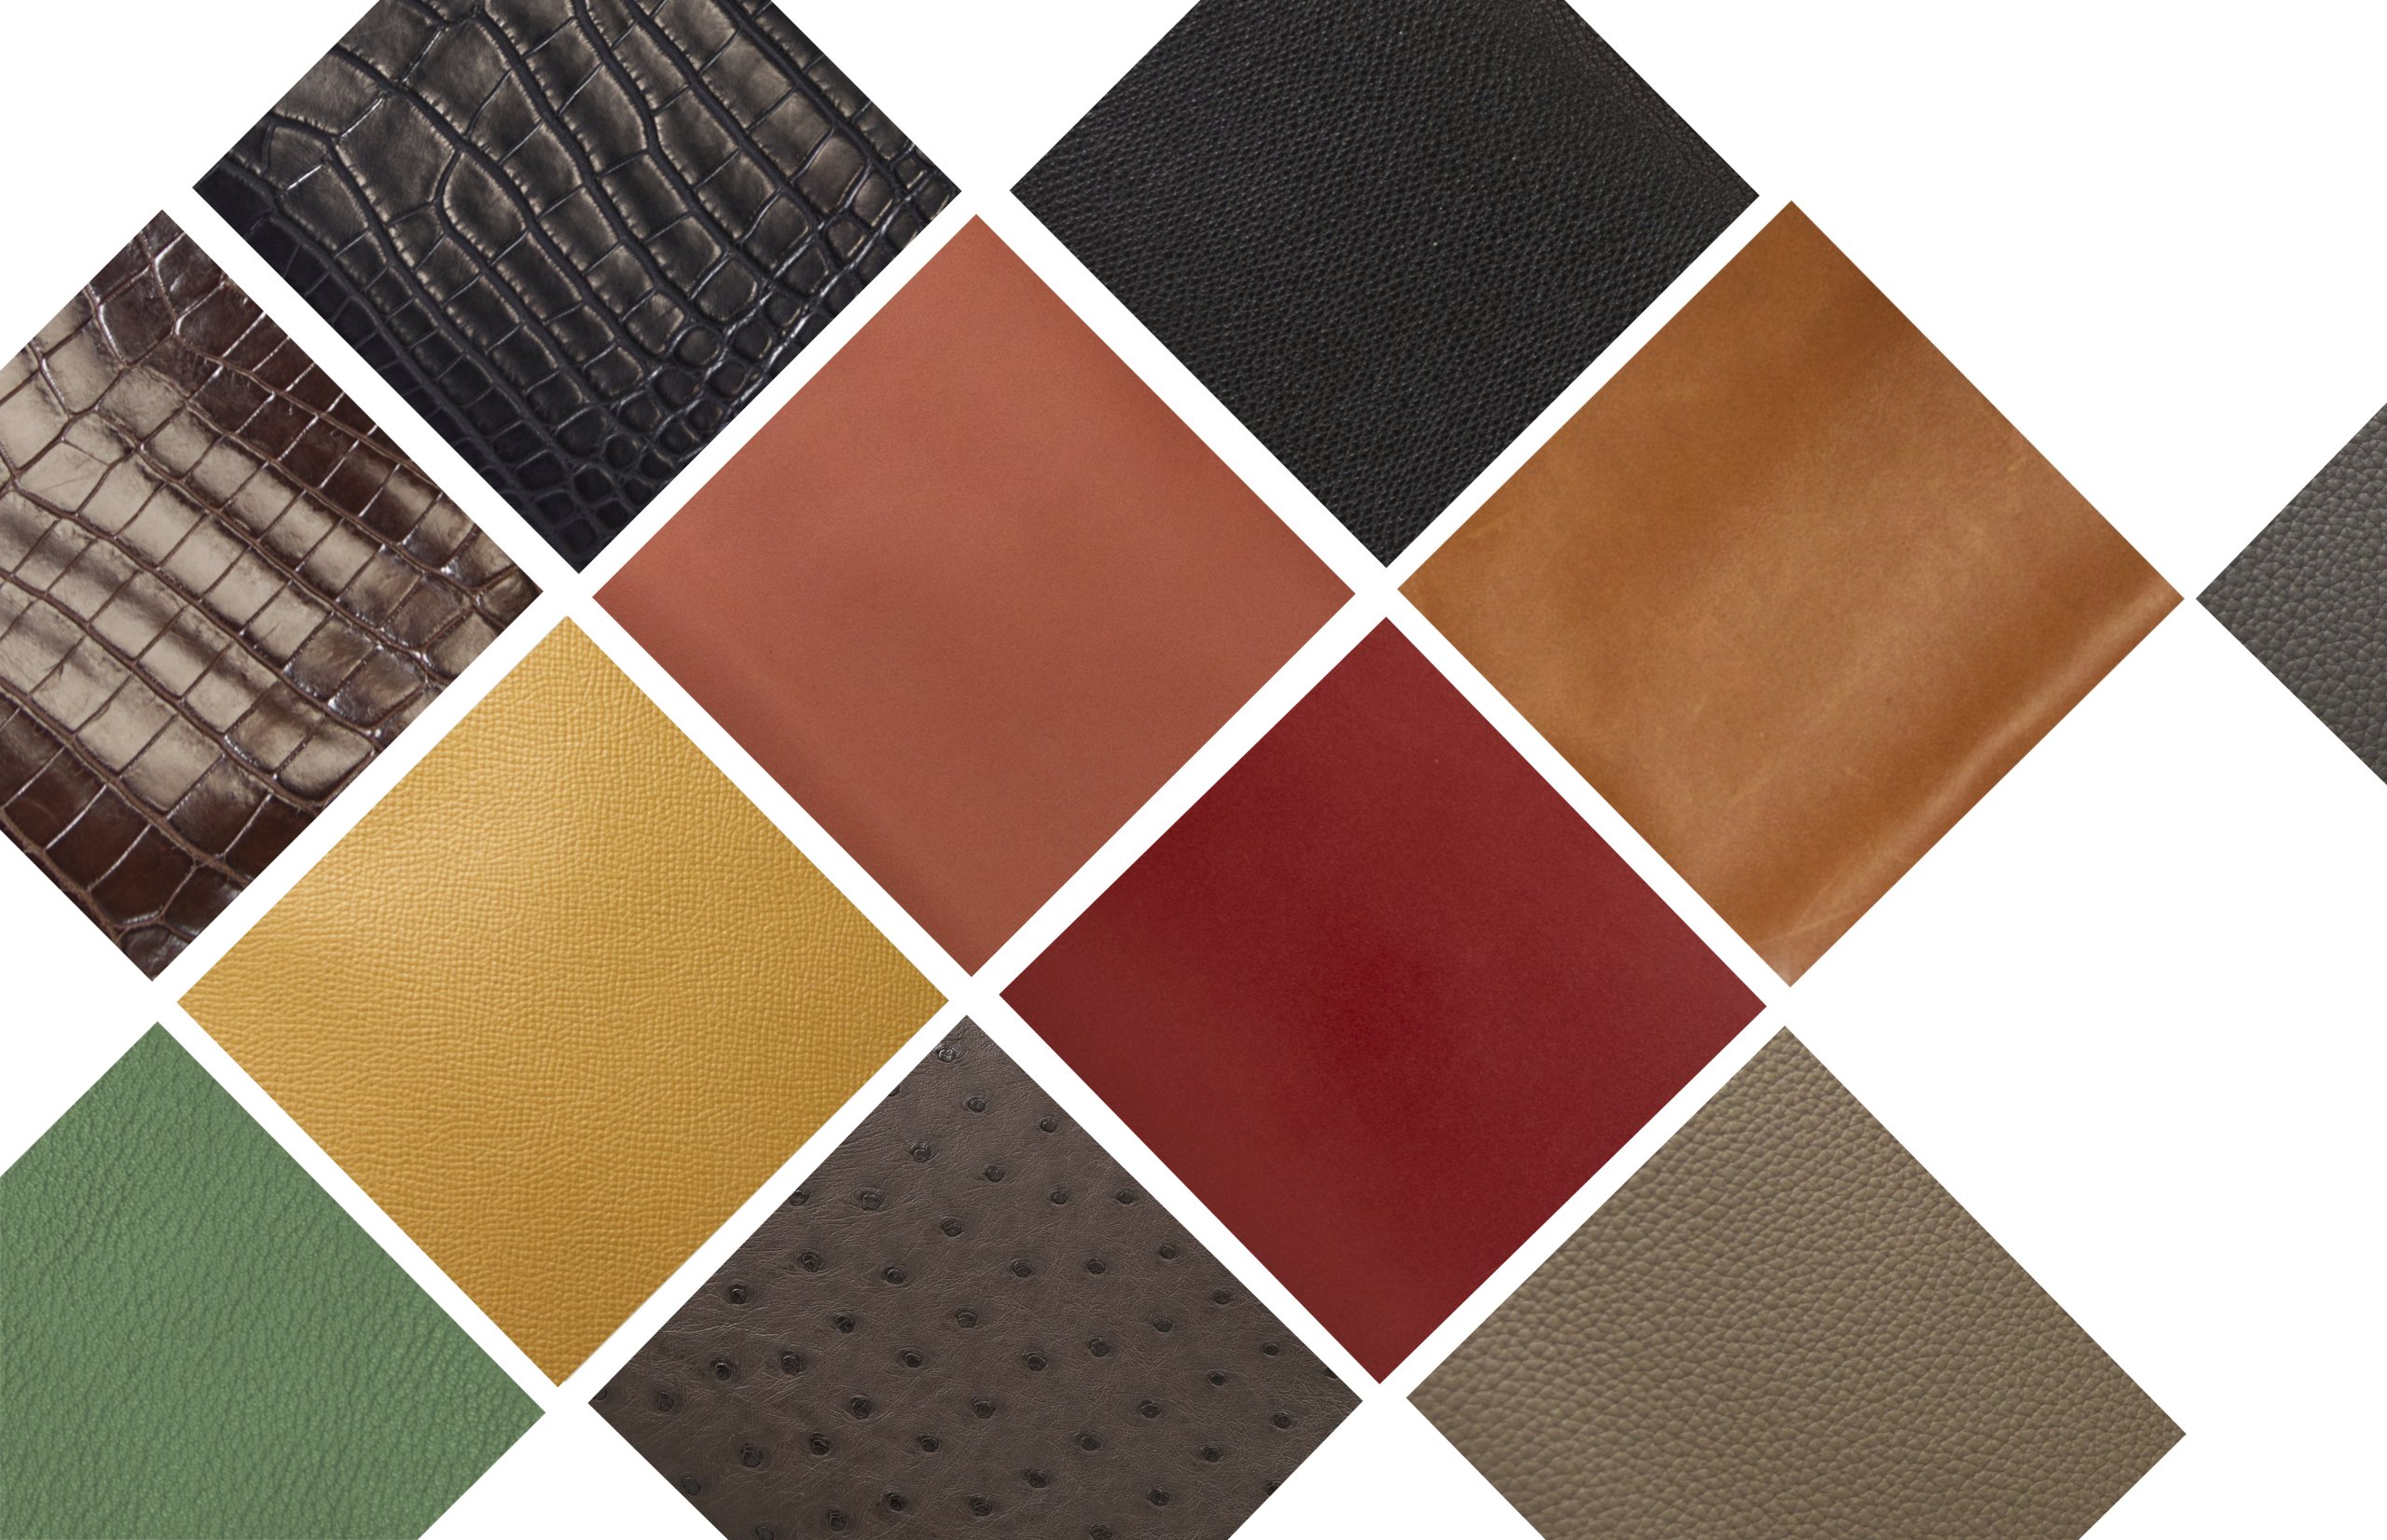 Hermès leather types: The great overview with valuable insider details.